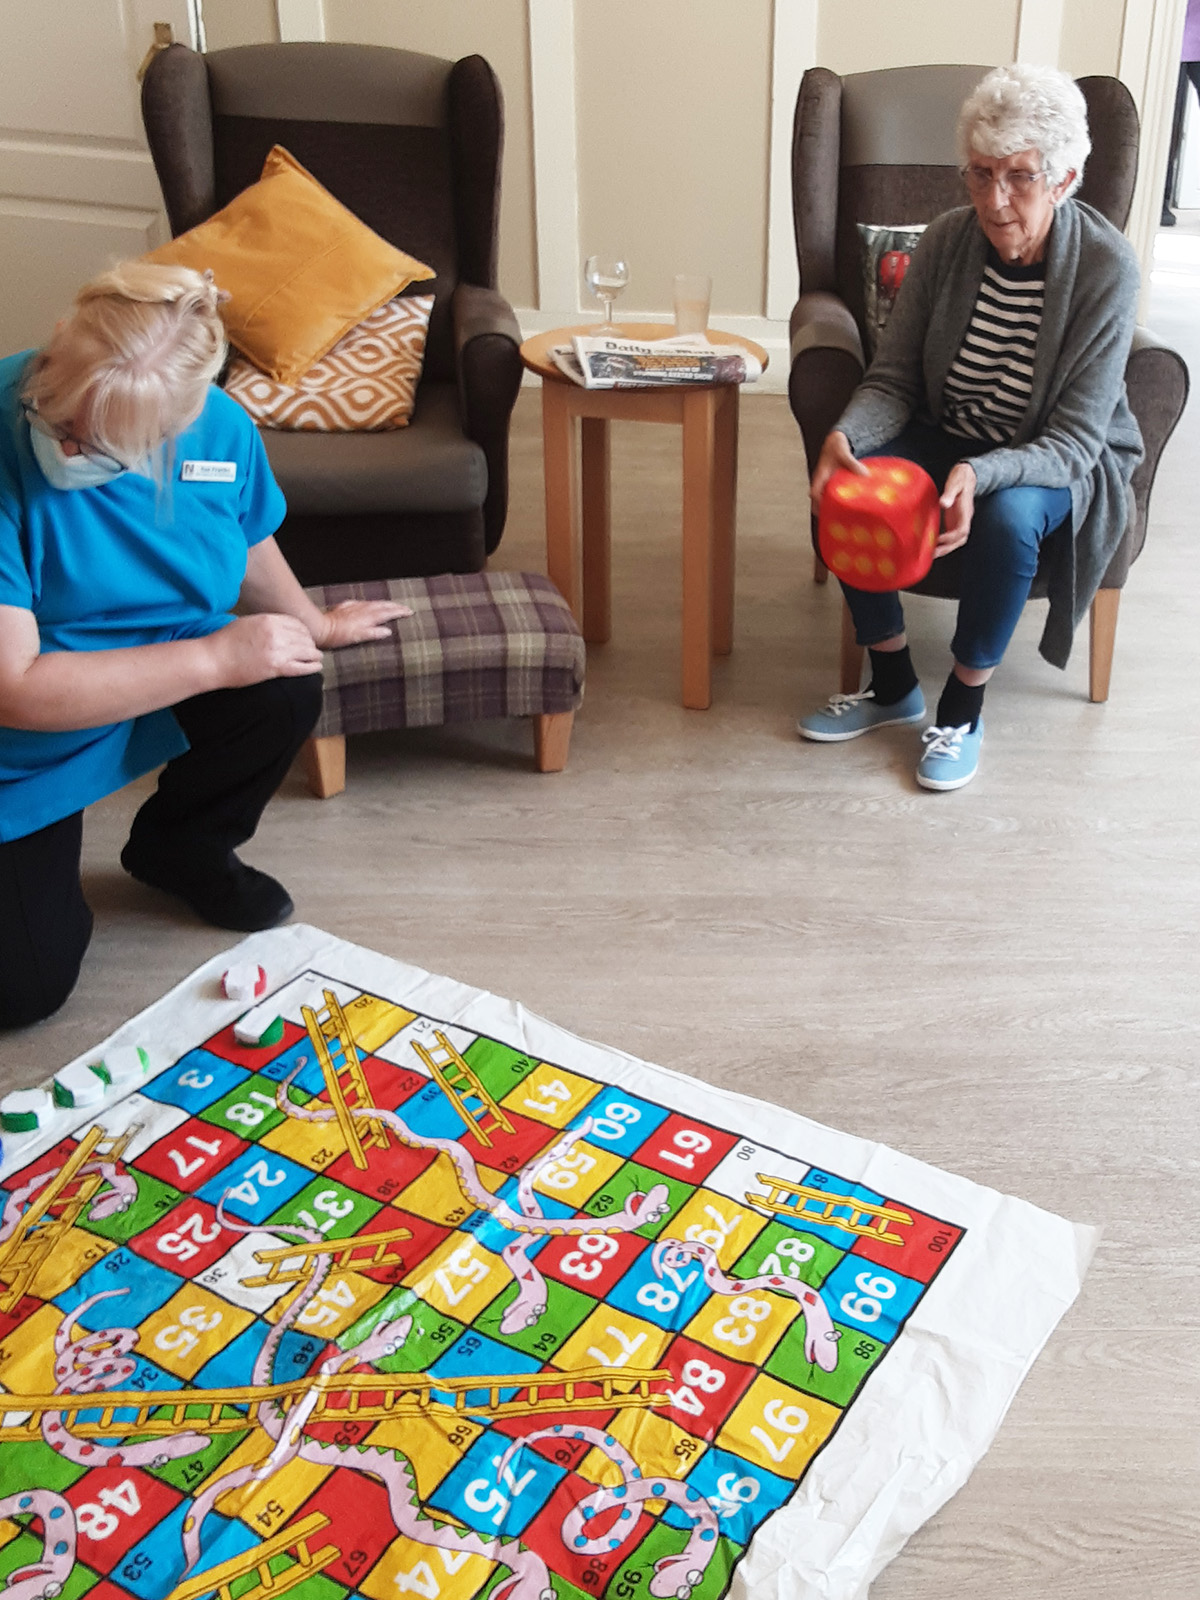 Woodstock Residential Care Home resident rolling a dice for floor snakes and ladders